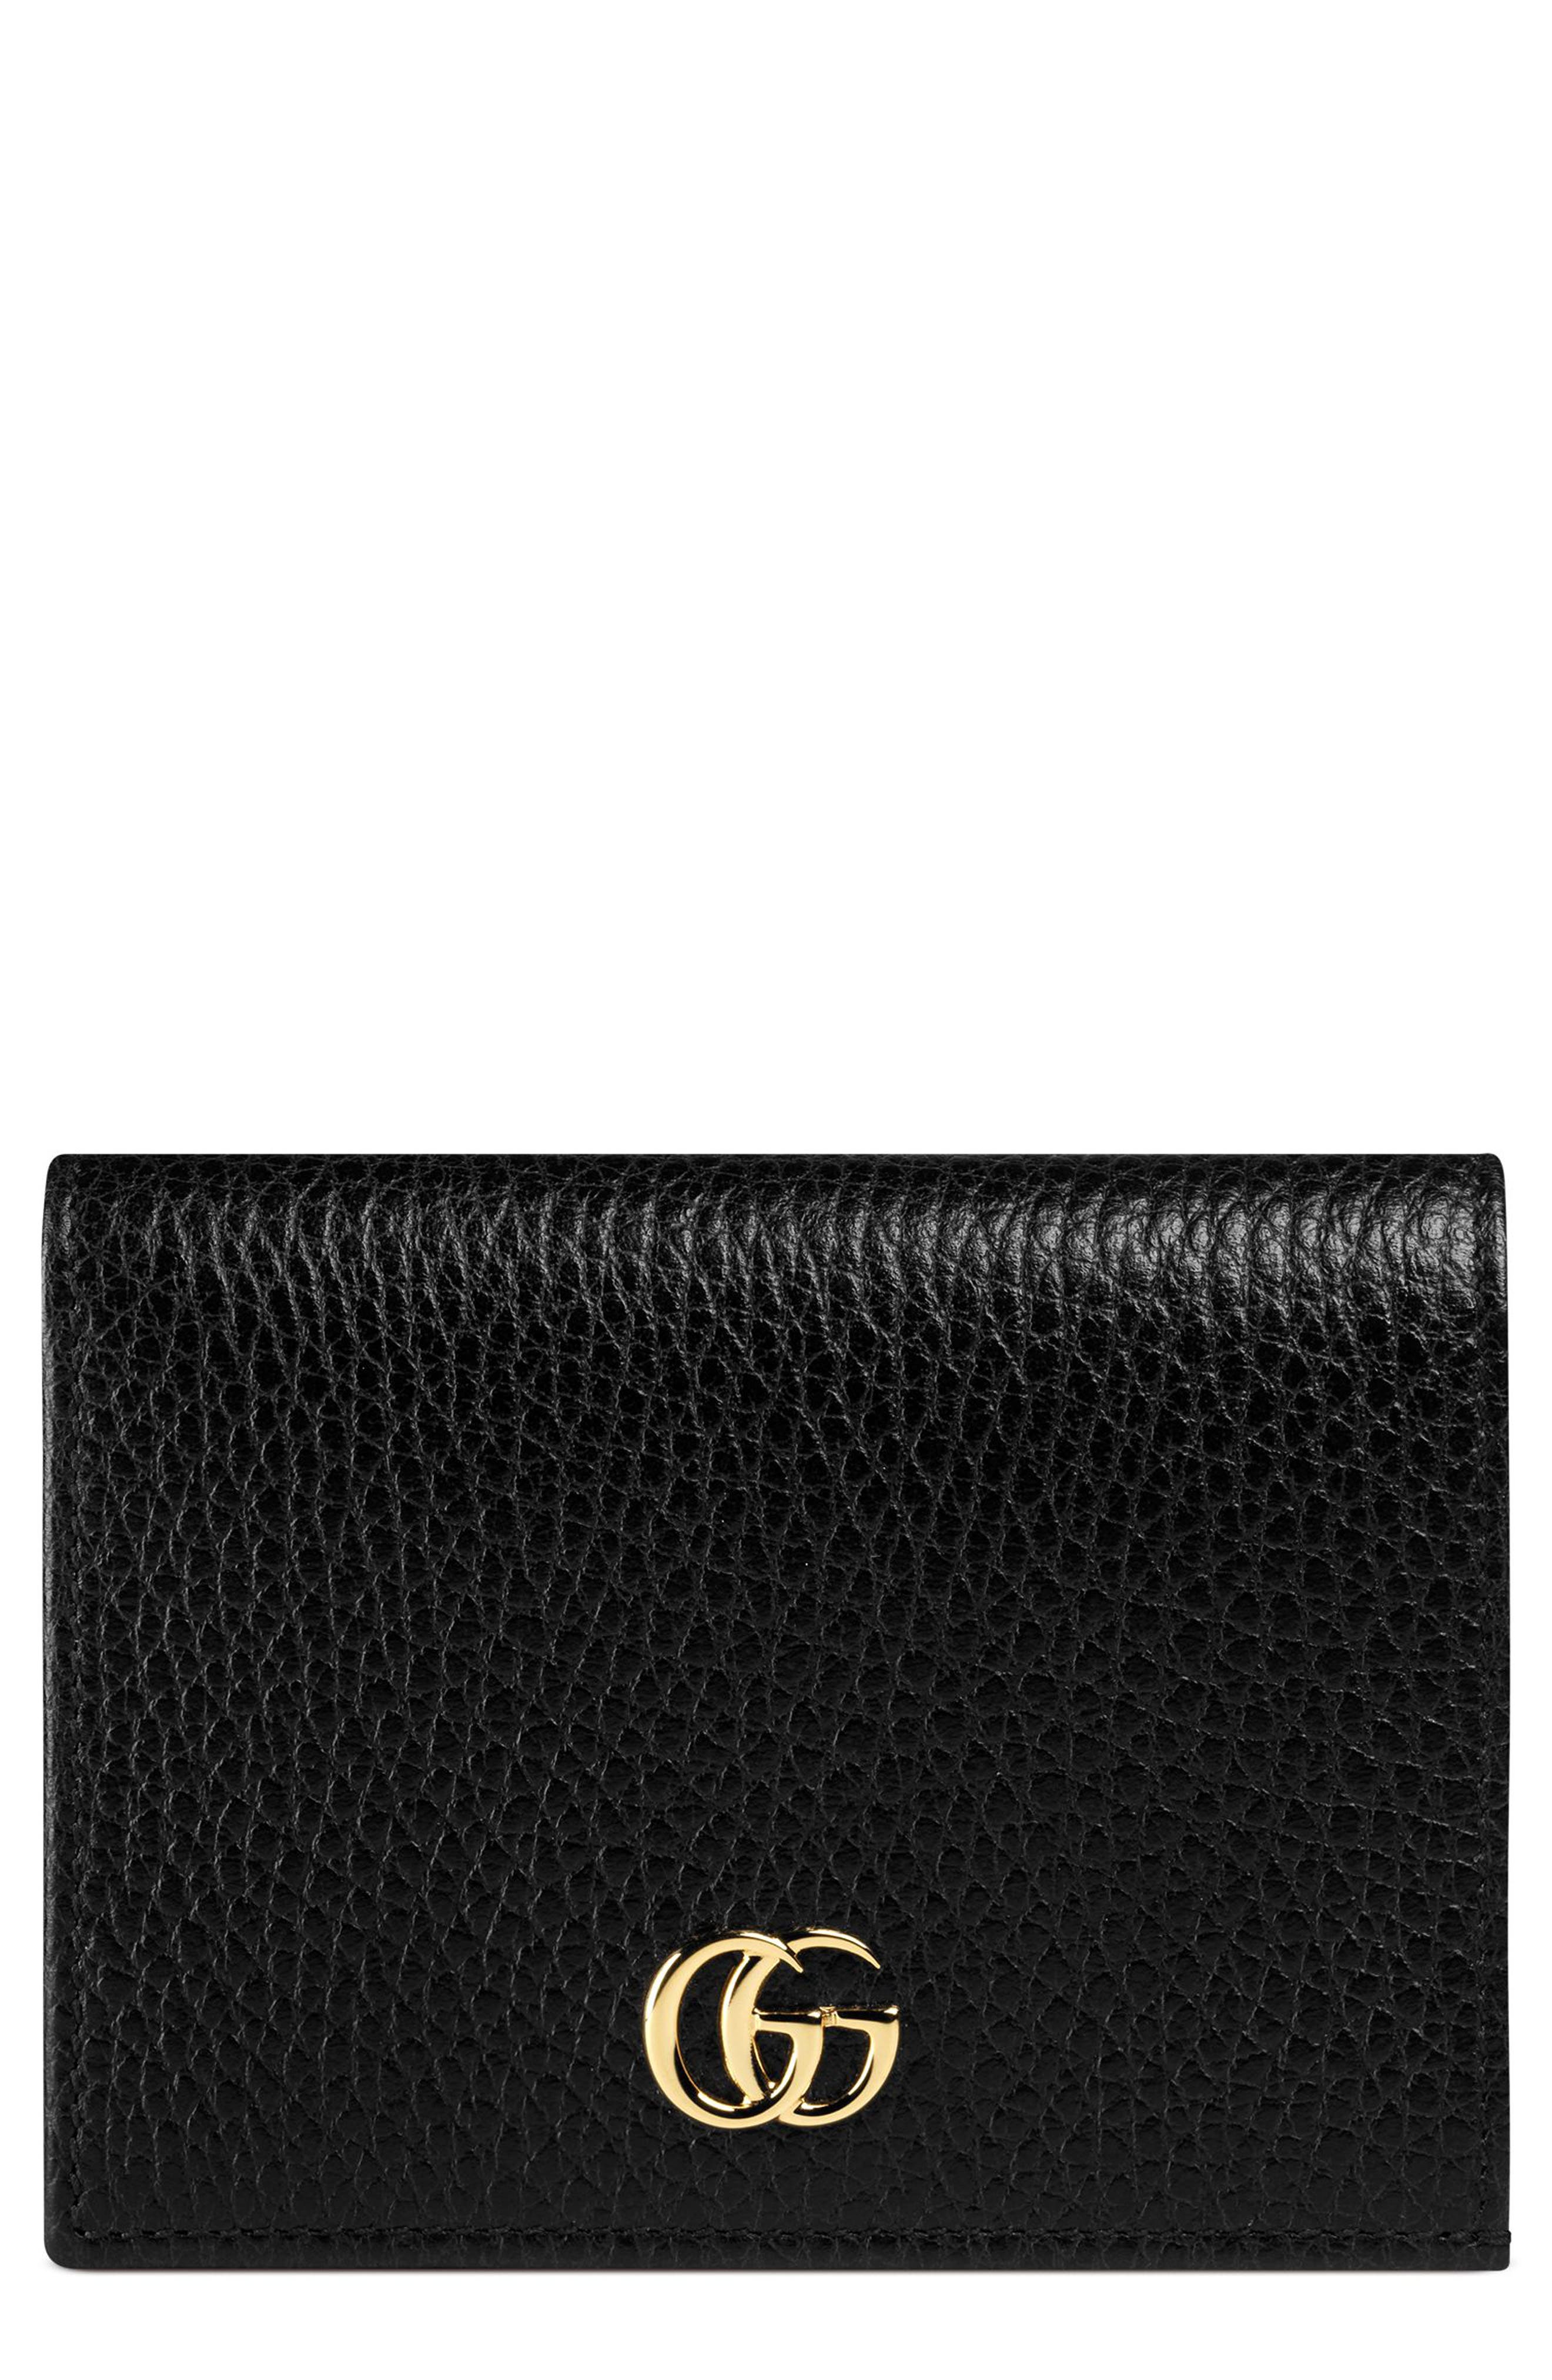 Gucci Petite Marmont Leather Card Case 